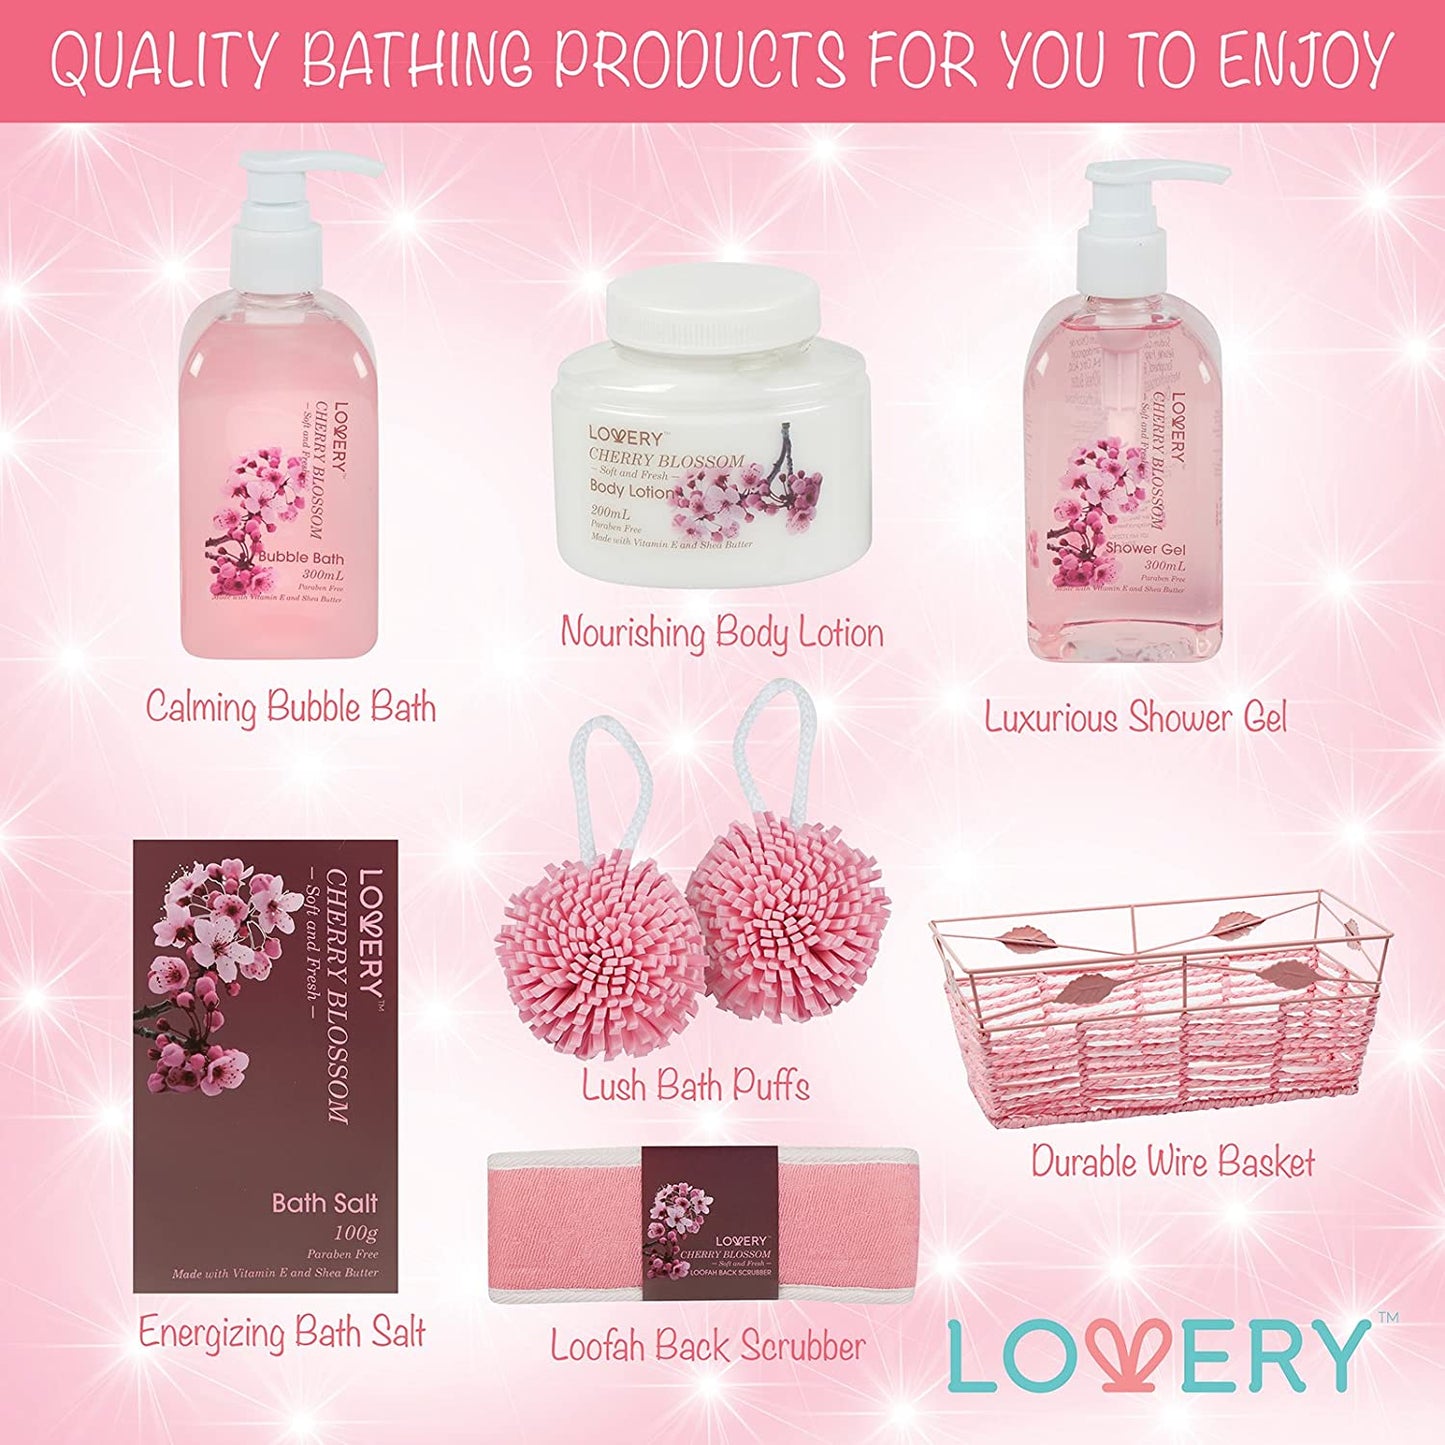 lovery home spa basket, home spa basket, Cherry Blossom Bath Set, chic cherry blossom spa basket, 7-piece cherry blossom spa kit, Shea-enriched bath set, Vitamin E infused spa products, Paraben-free cherry blossom set, luxurious cherry blossom spa essentials, gift-ready cherry blossom bath package, all-natural cherry blossom spa items, eco-friendly cherry blossom bath kit